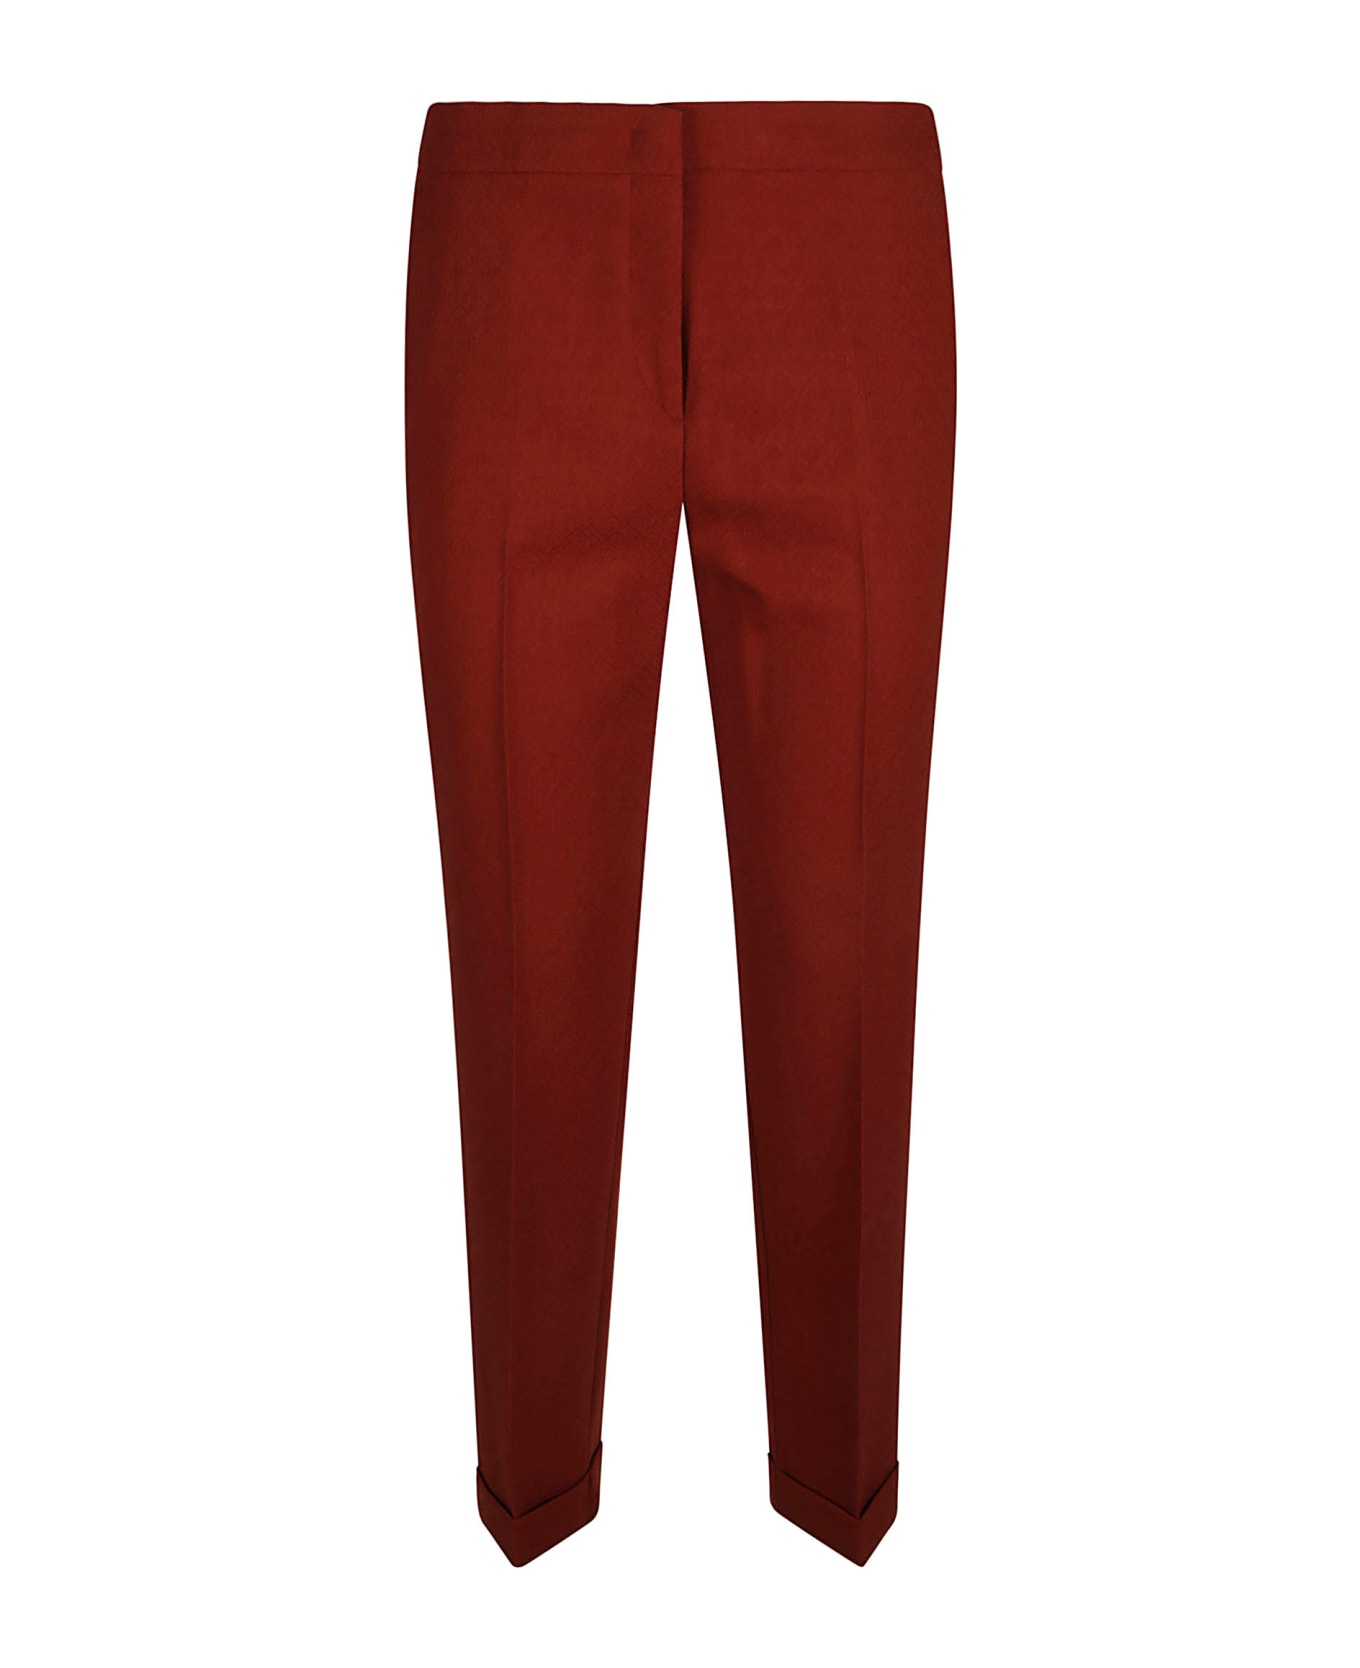 Etro Concealed Trousers - Brown